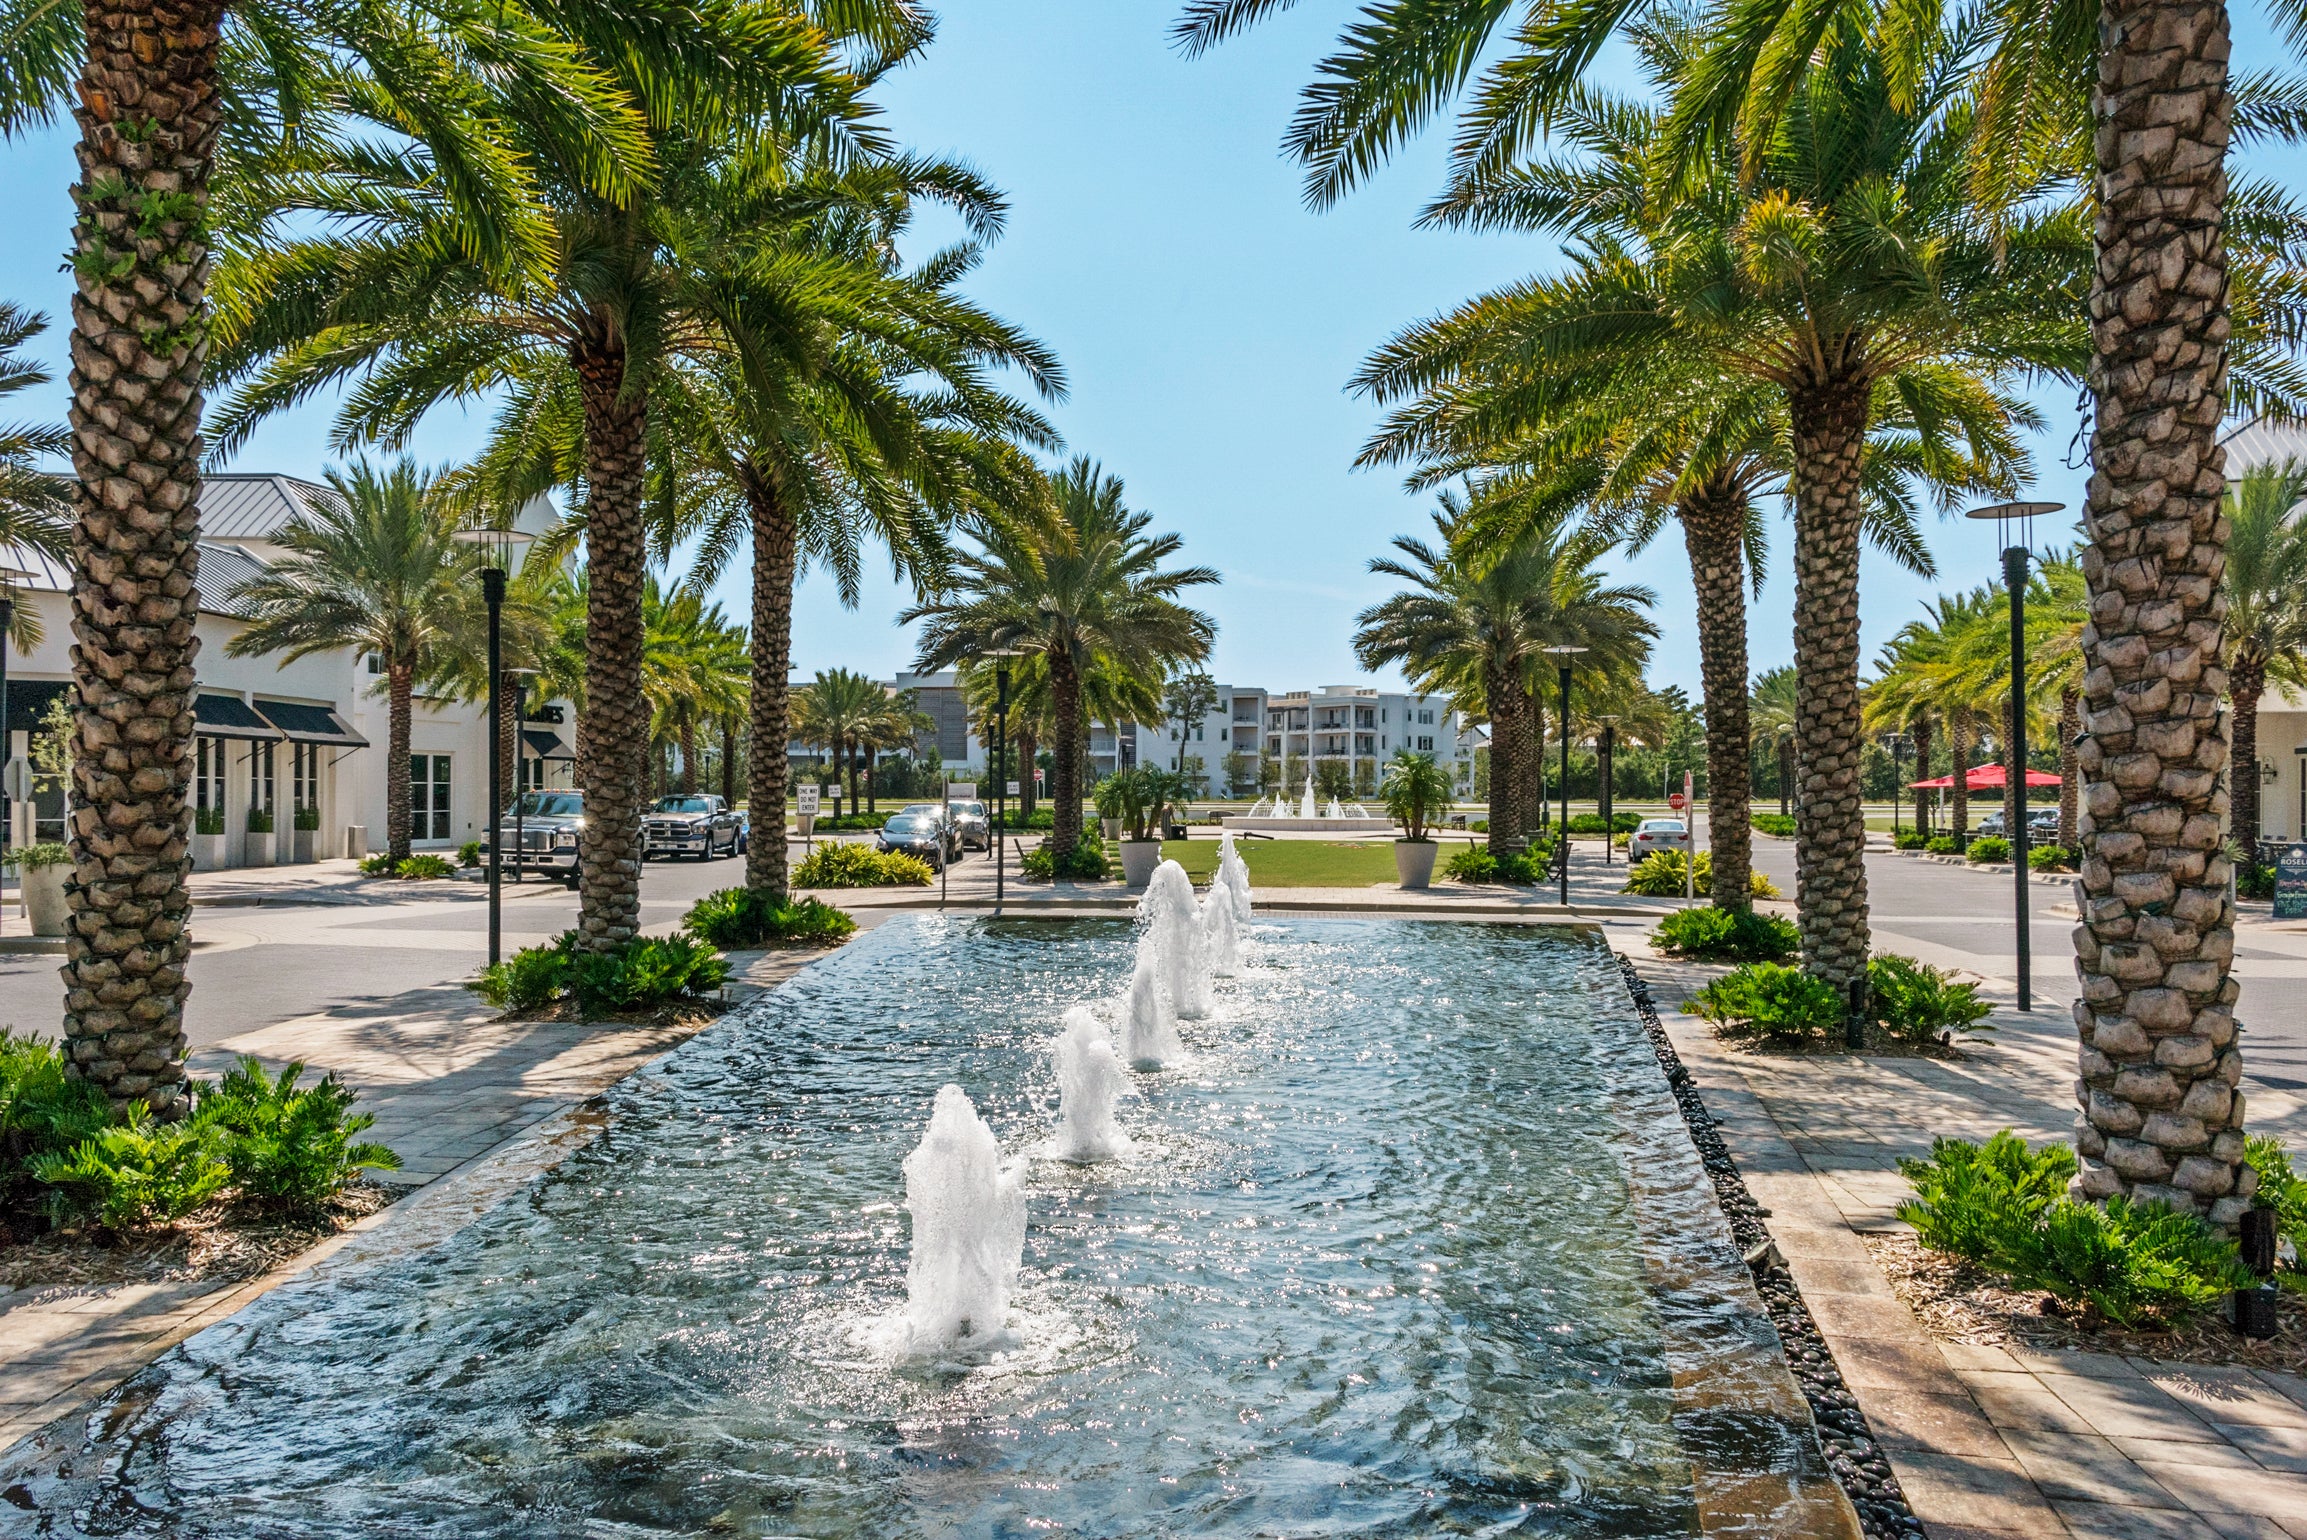 Beautiful fountains and palm trees